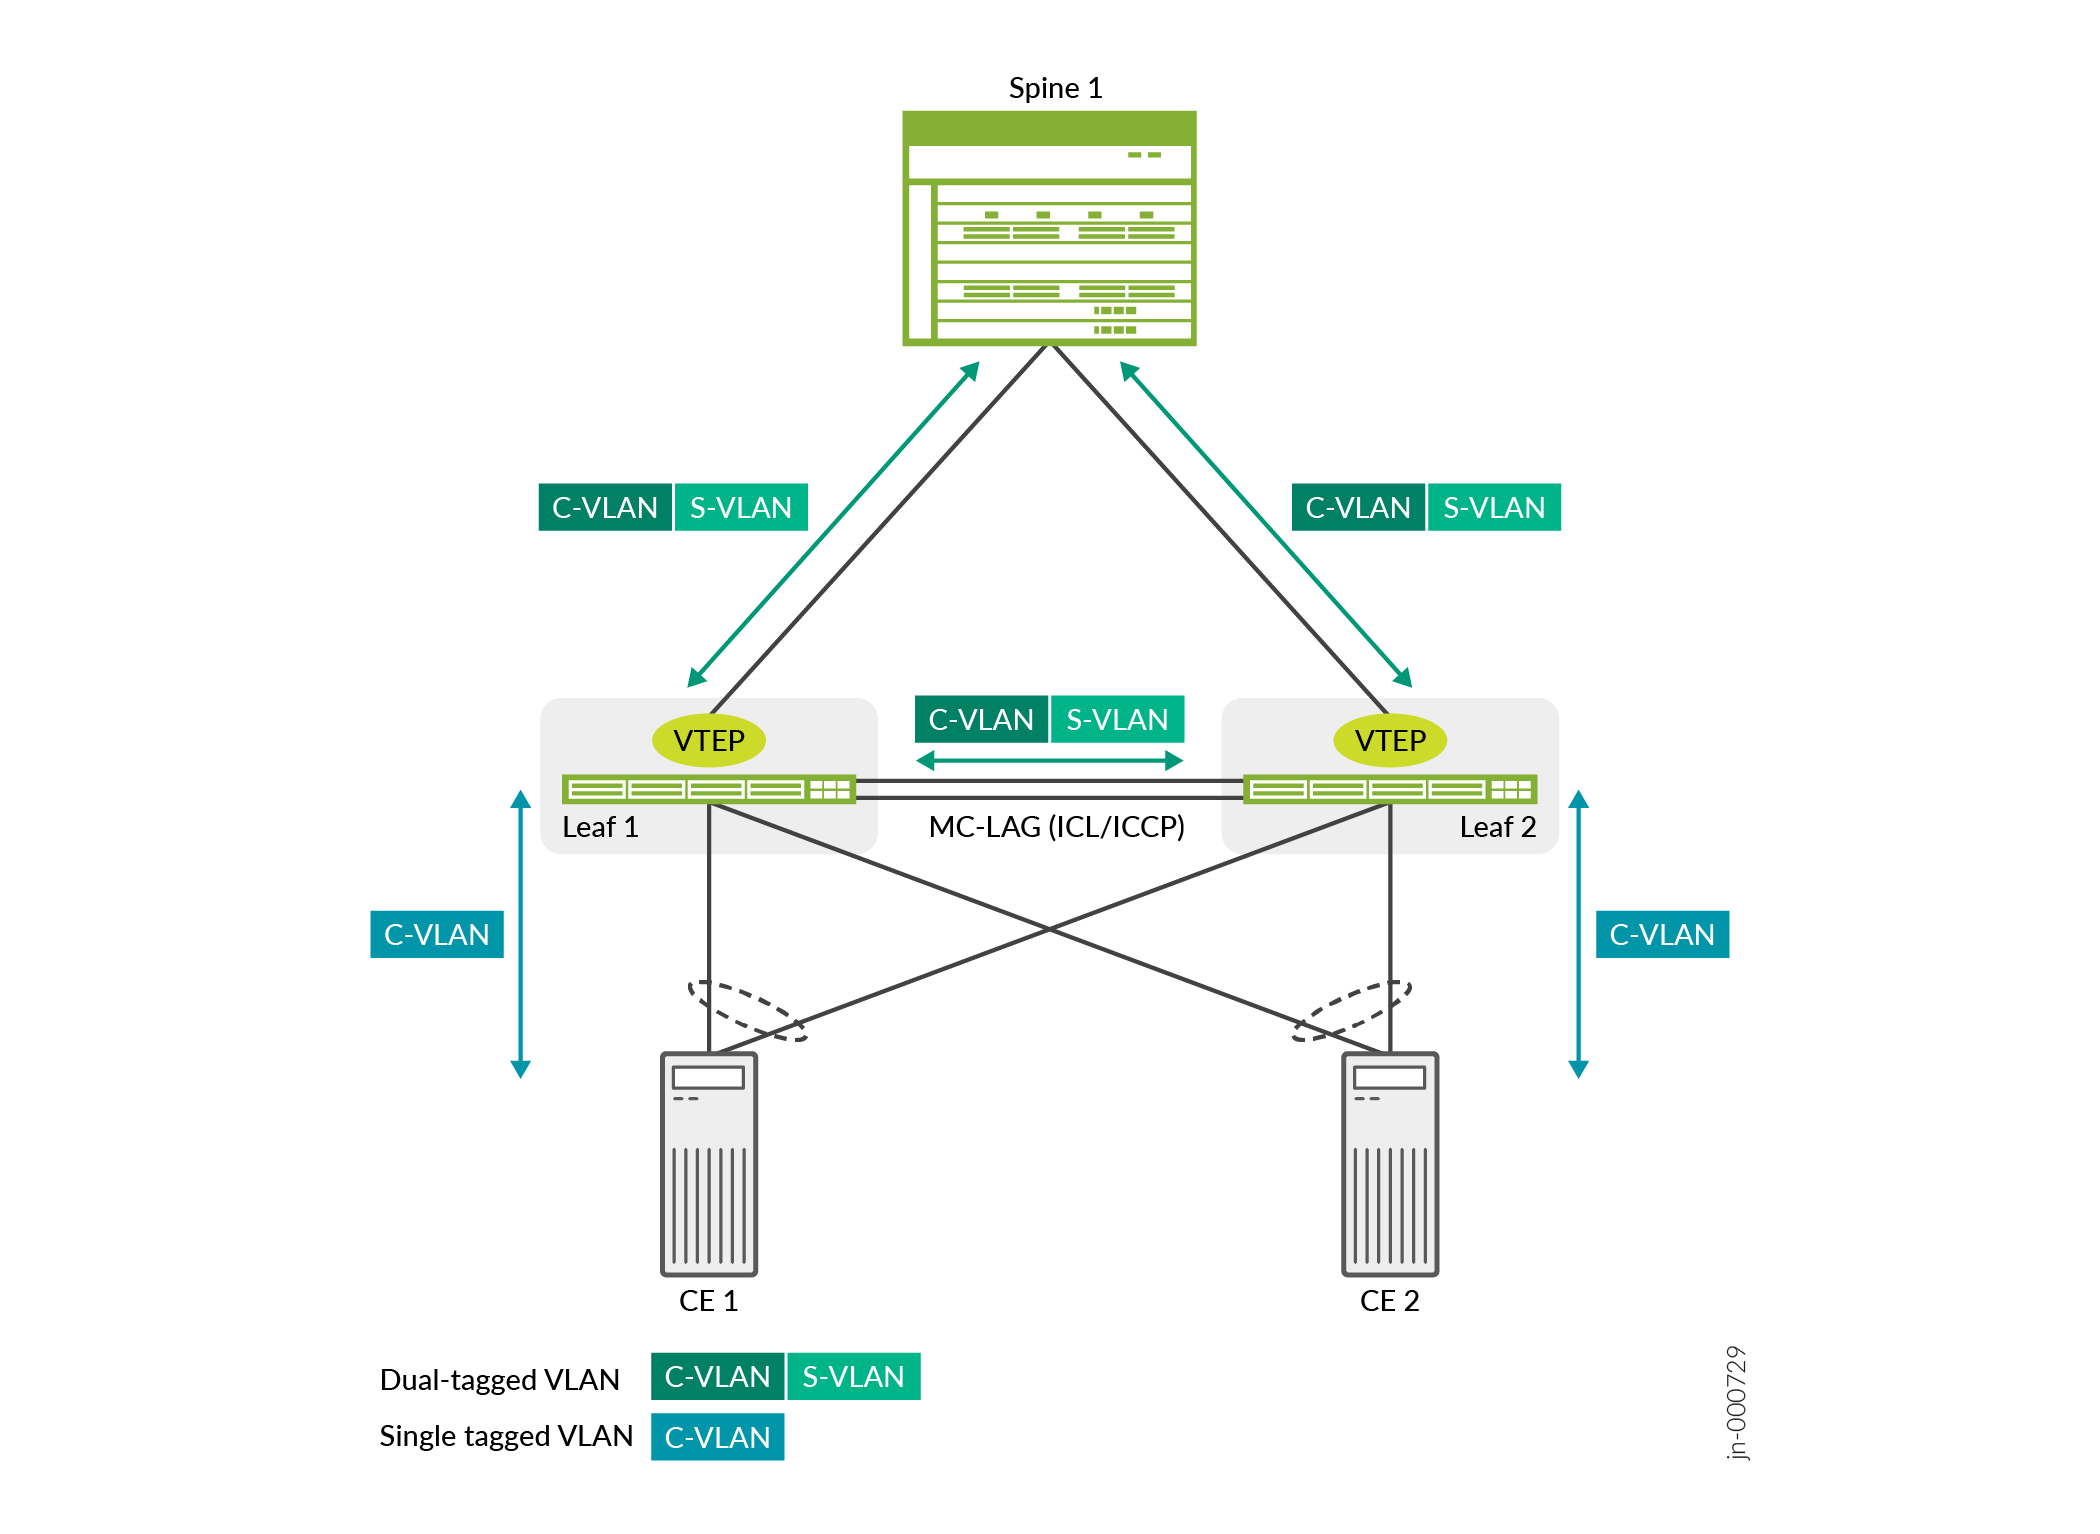 VLANs in a Spine-and-Leaf Network